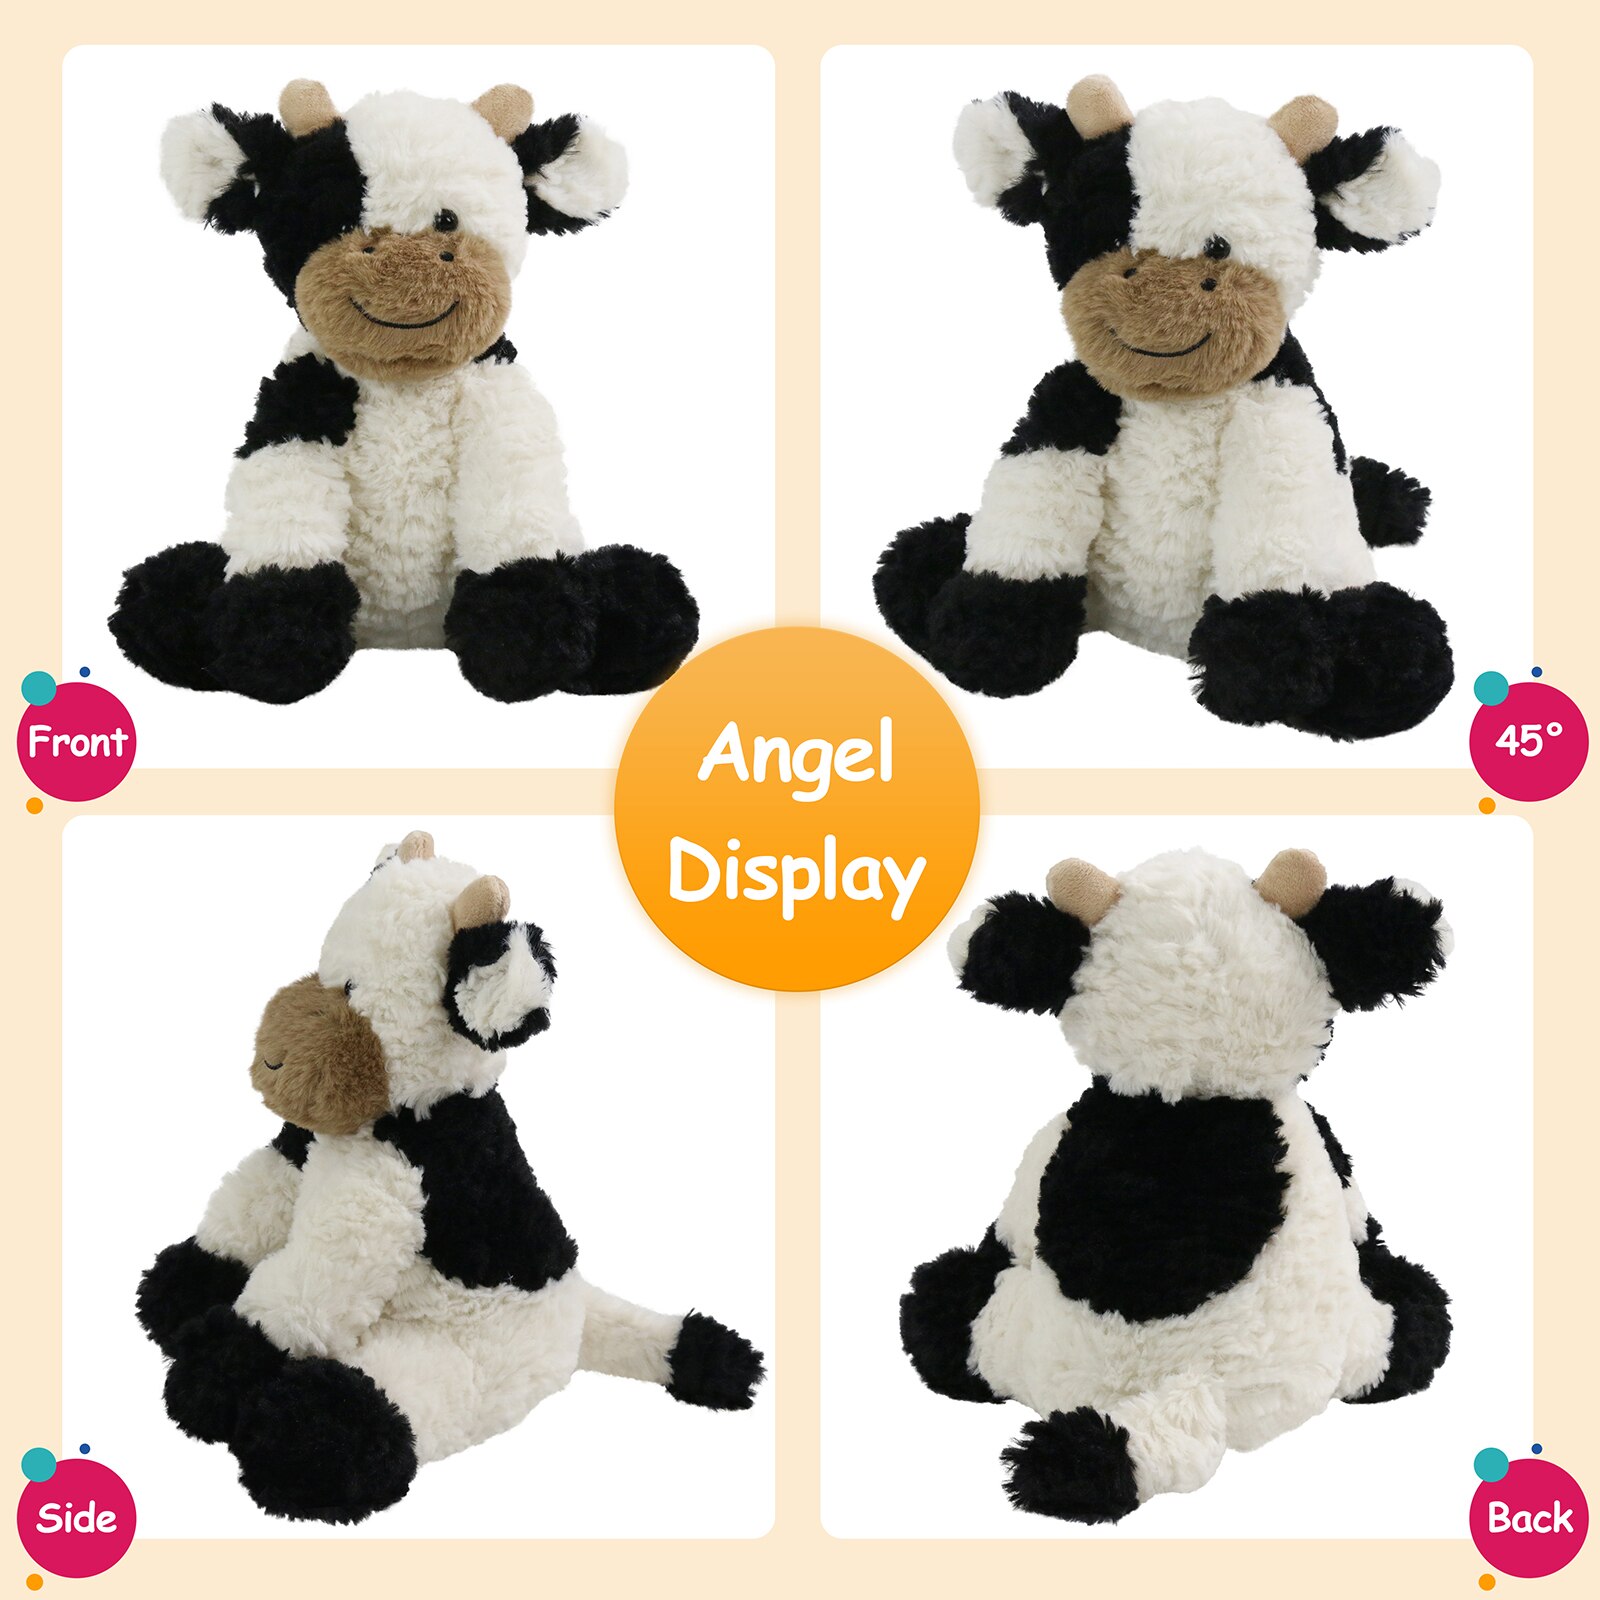 SpecialYou Dairy Cow Stuffed Animal Adorable Soft Plush Farm Animal Toy Great Birthday, White&Black, 9 inches